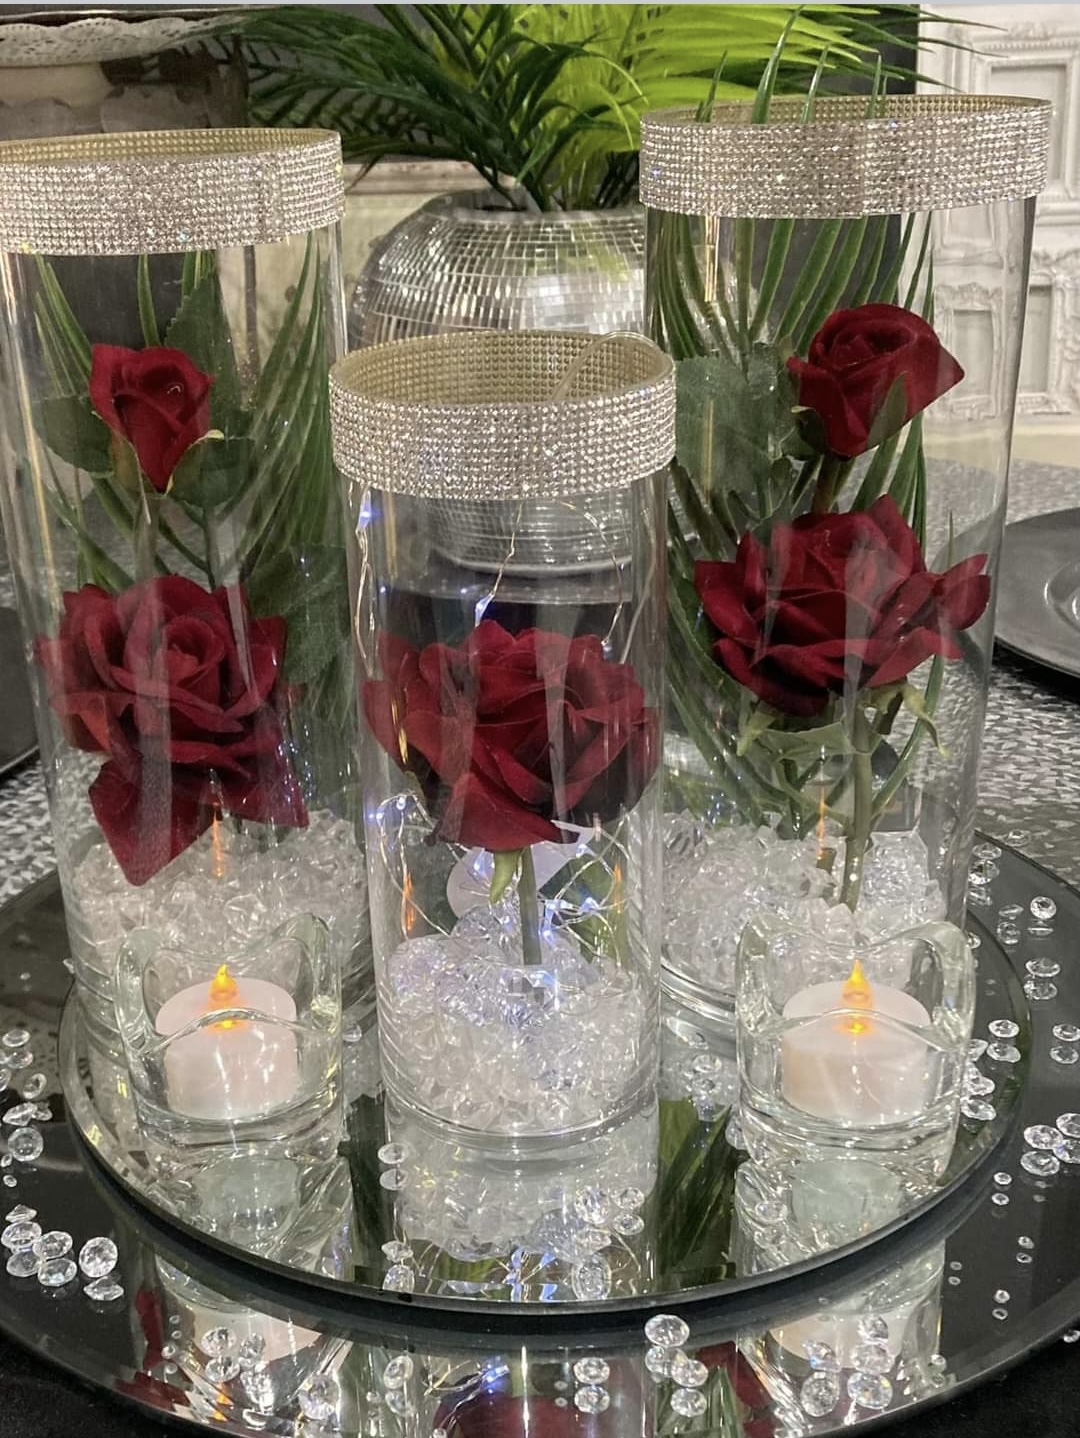 3 glass vases with diamanté rims and filled with red roses